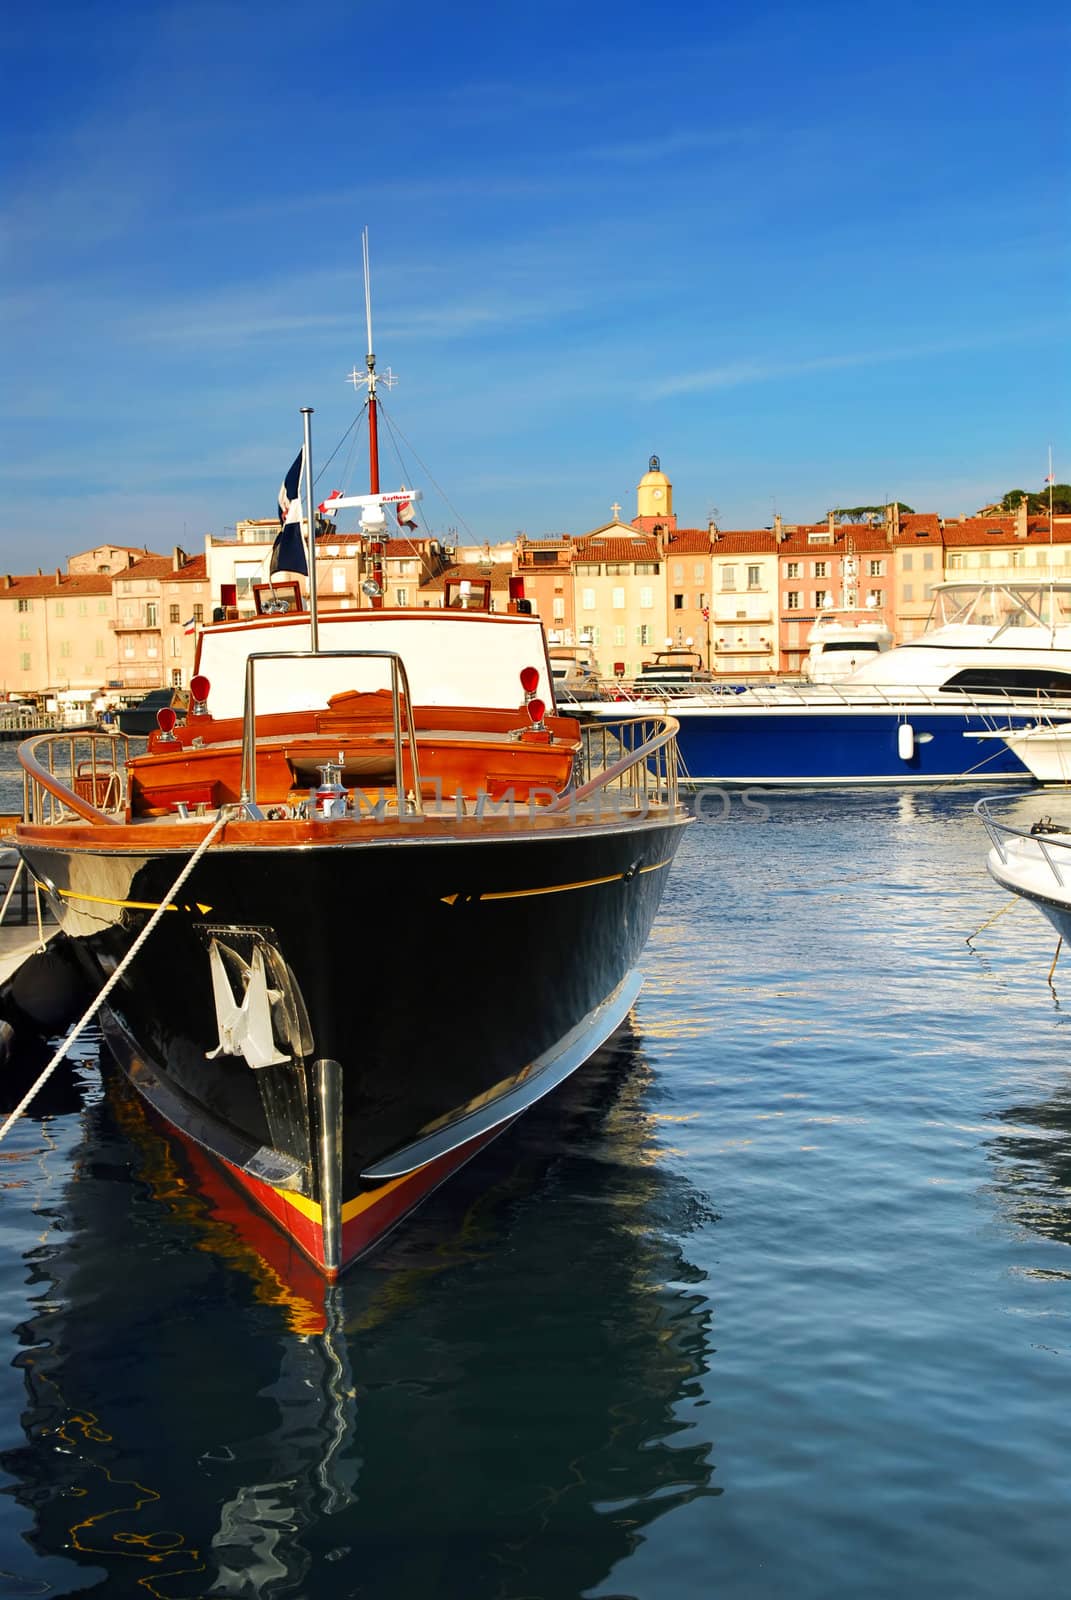 Boats at St.Tropez by elenathewise